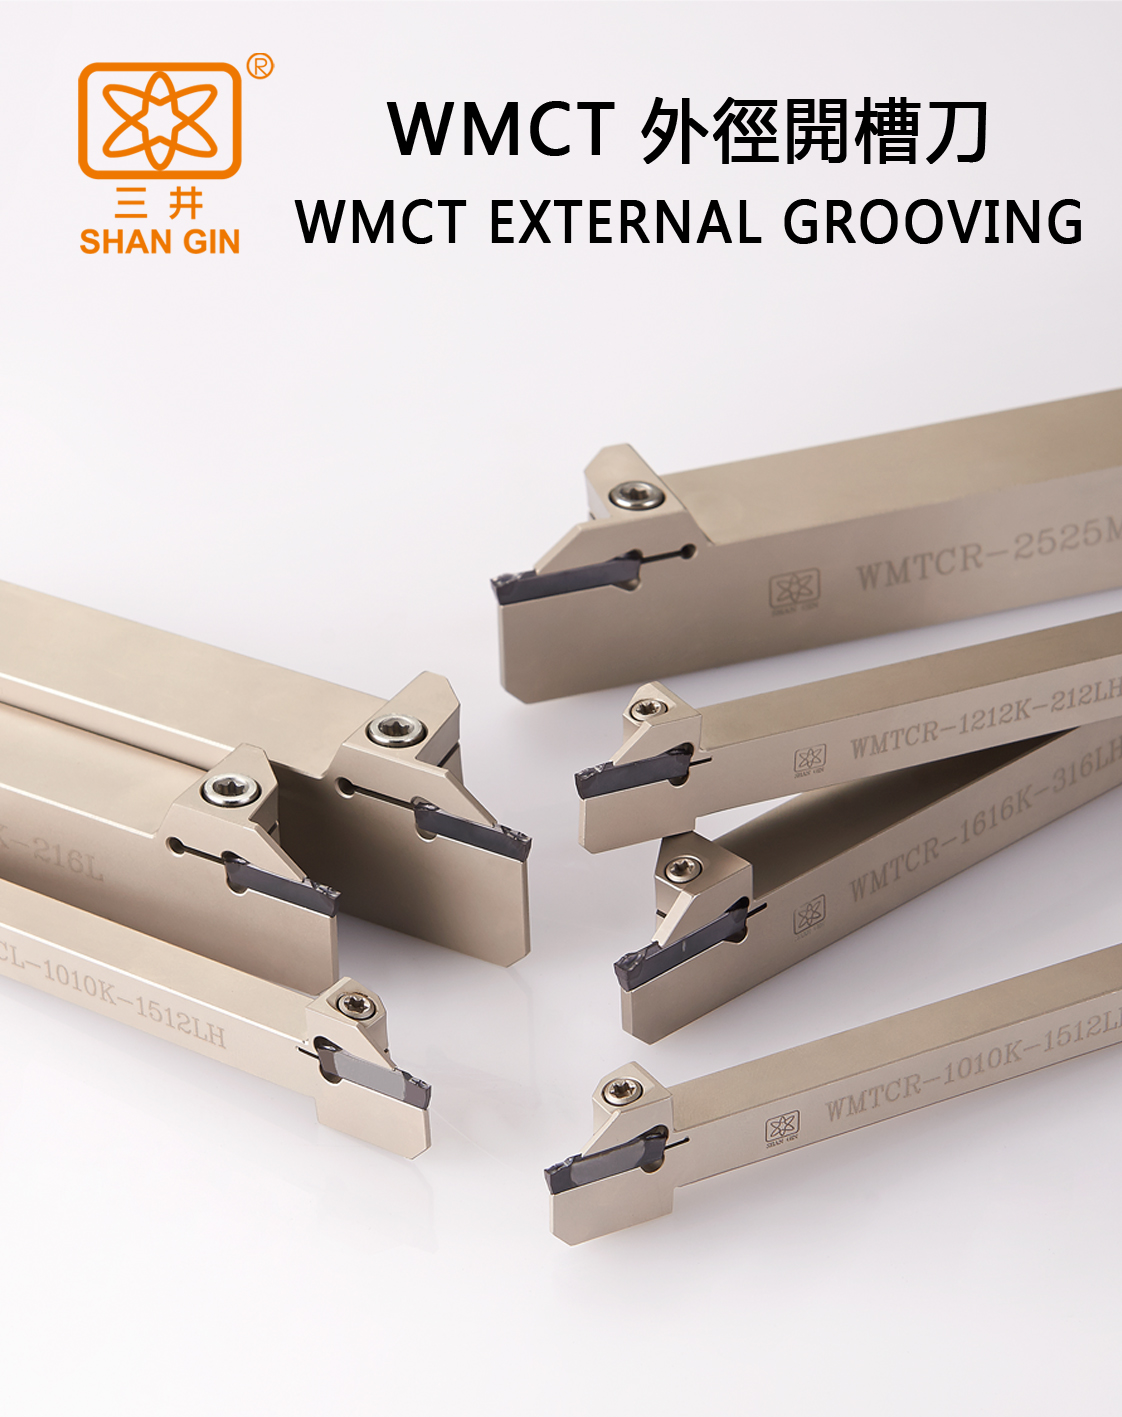 Products|WMTC EXTERNAL GROOVING